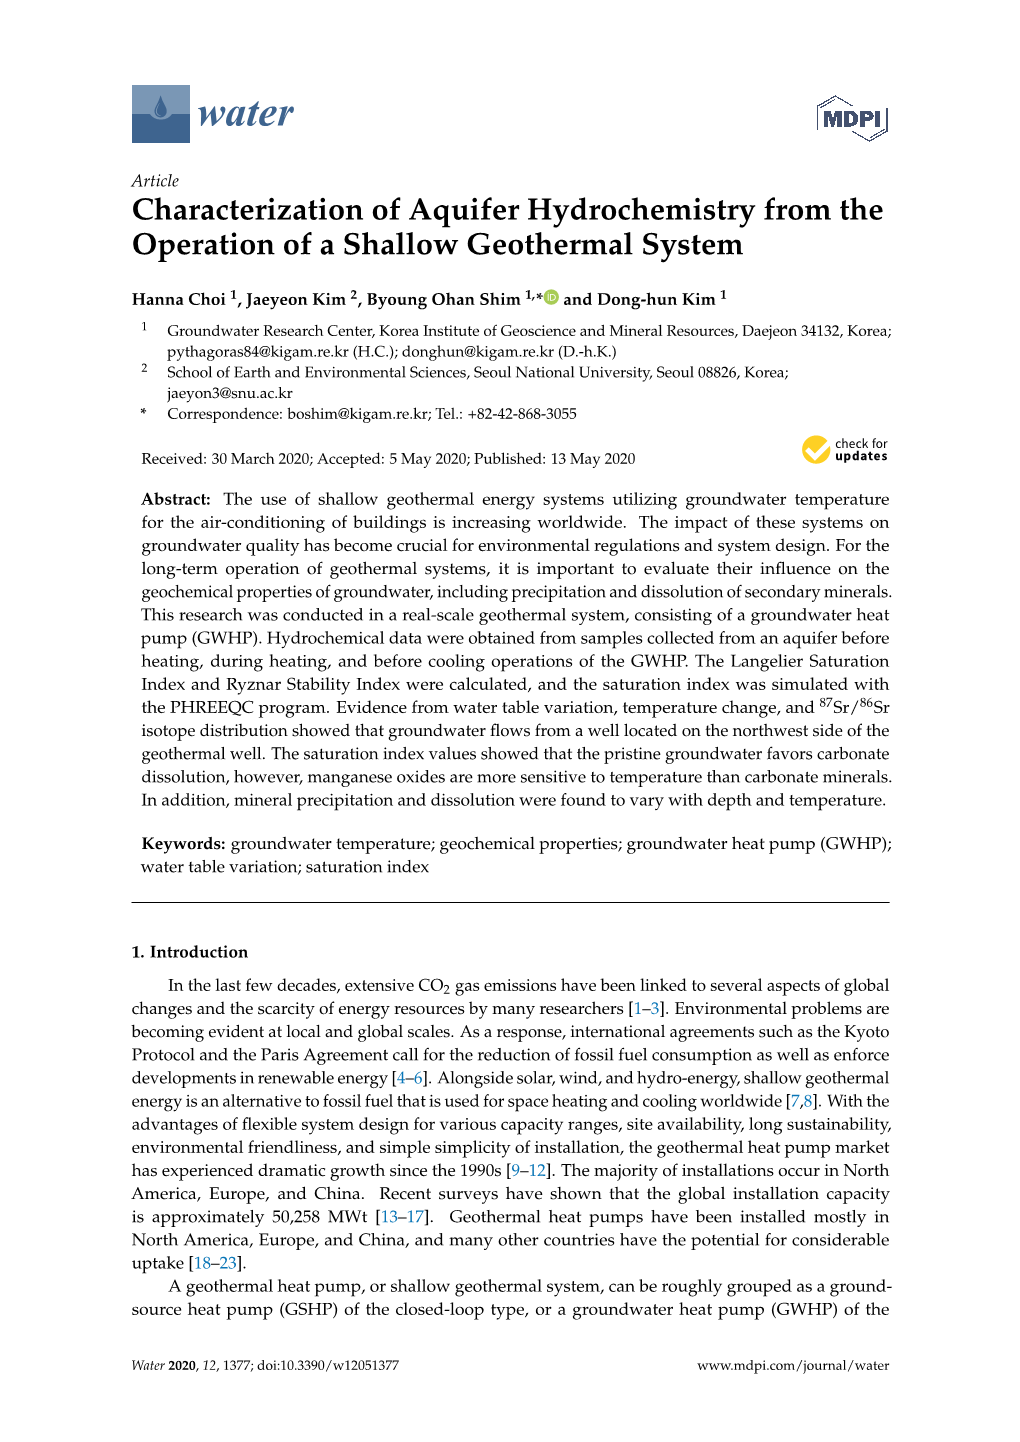 Characterization of Aquifer Hydrochemistry from the Operation of a Shallow Geothermal System